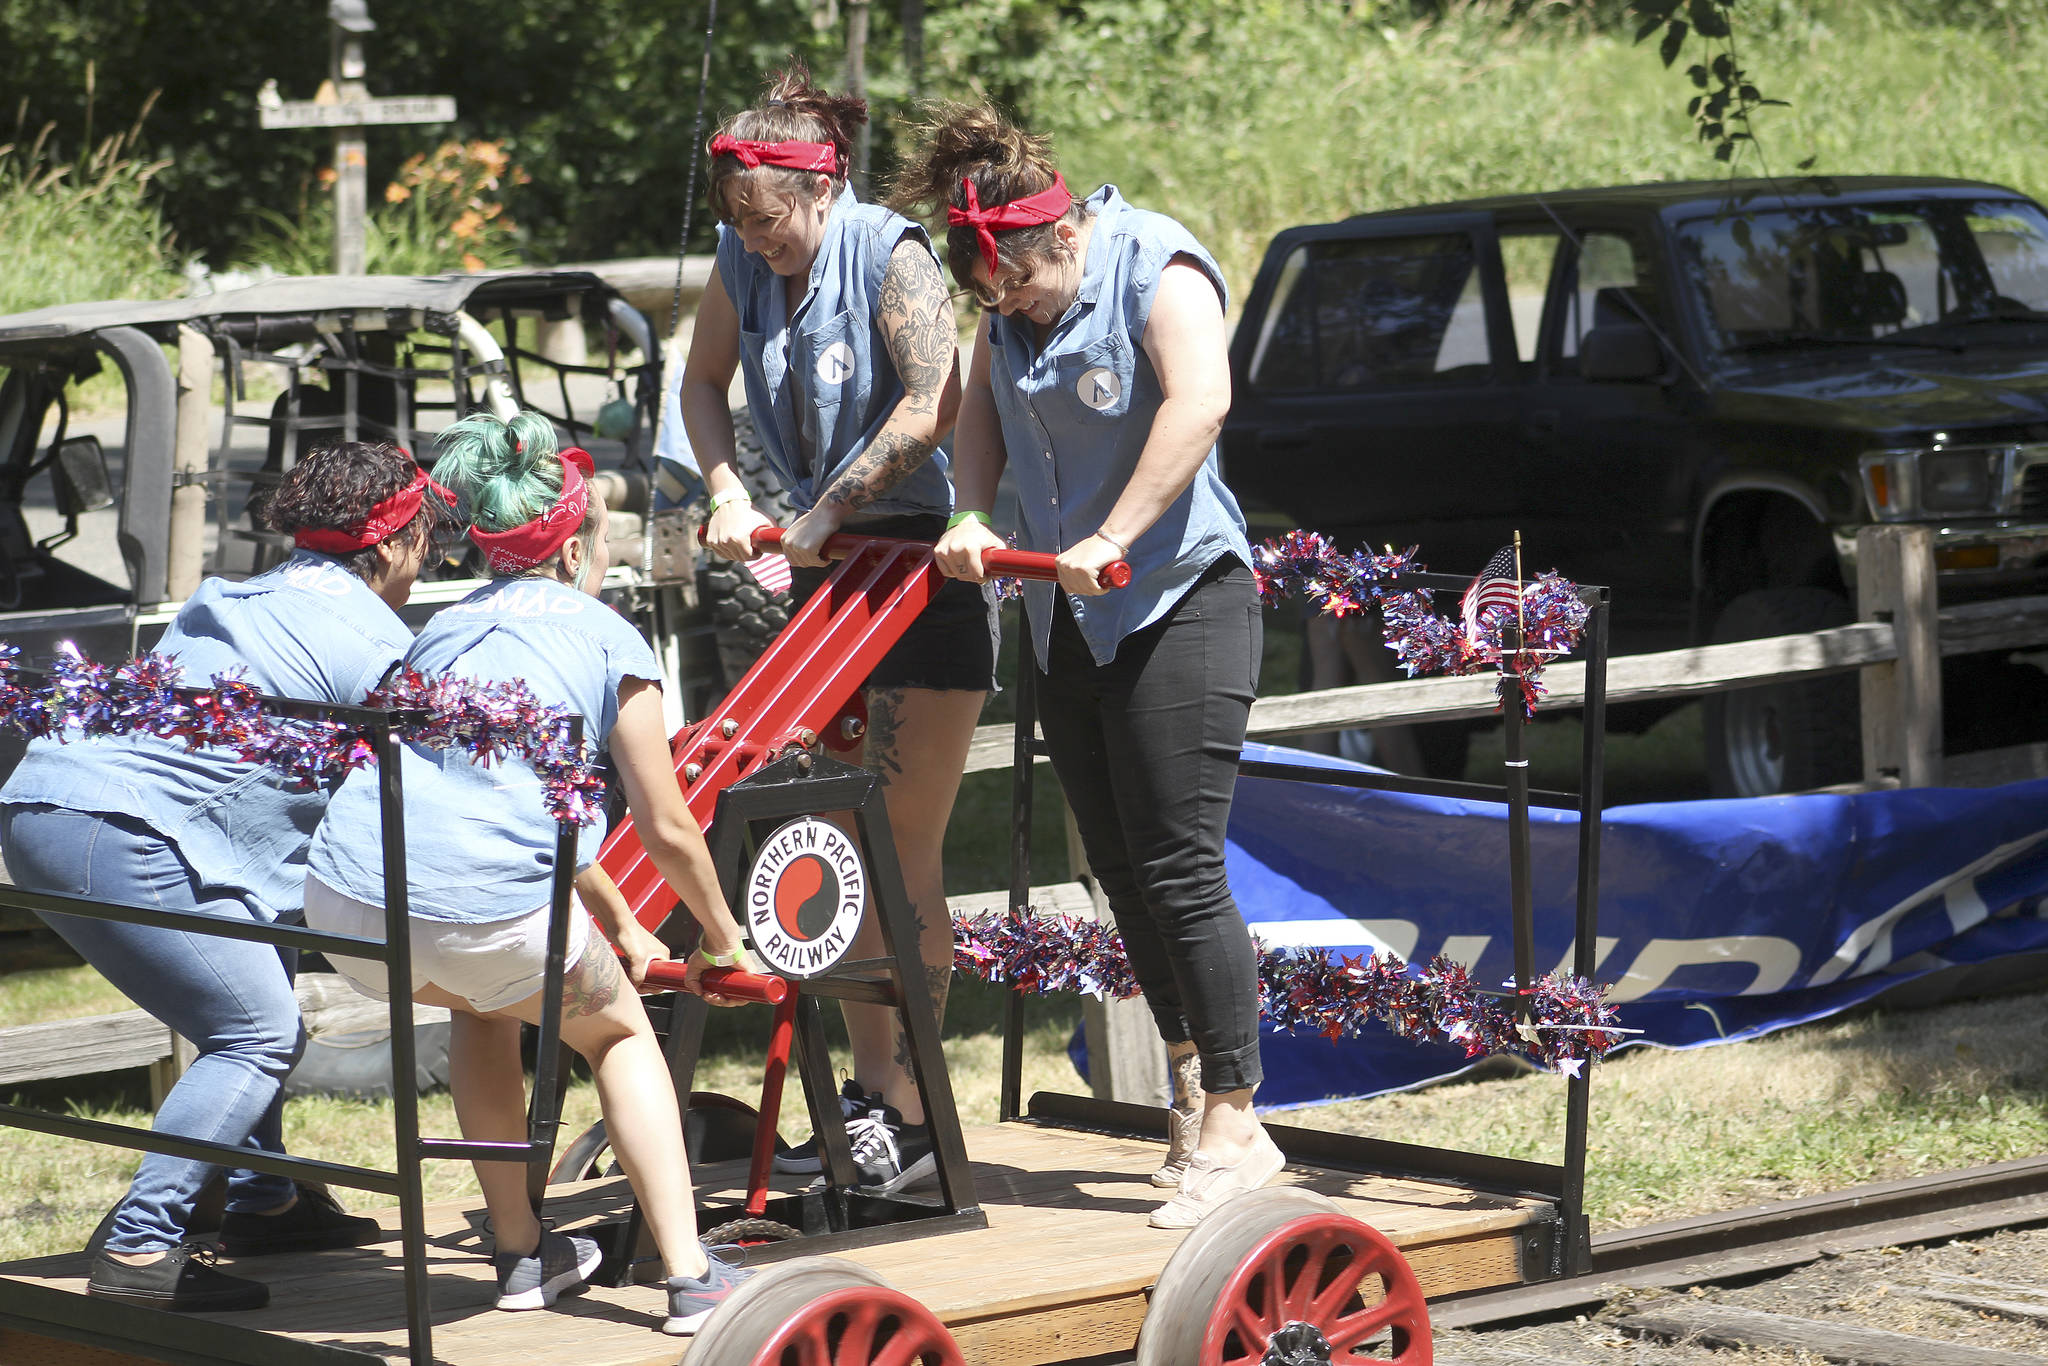 Unless you’re extra burley, Wilkeson Handcar Races competitors often need a team of four people to race their handcar down the 400-foot-plus railroad track. Photo by Ray Miller-Still